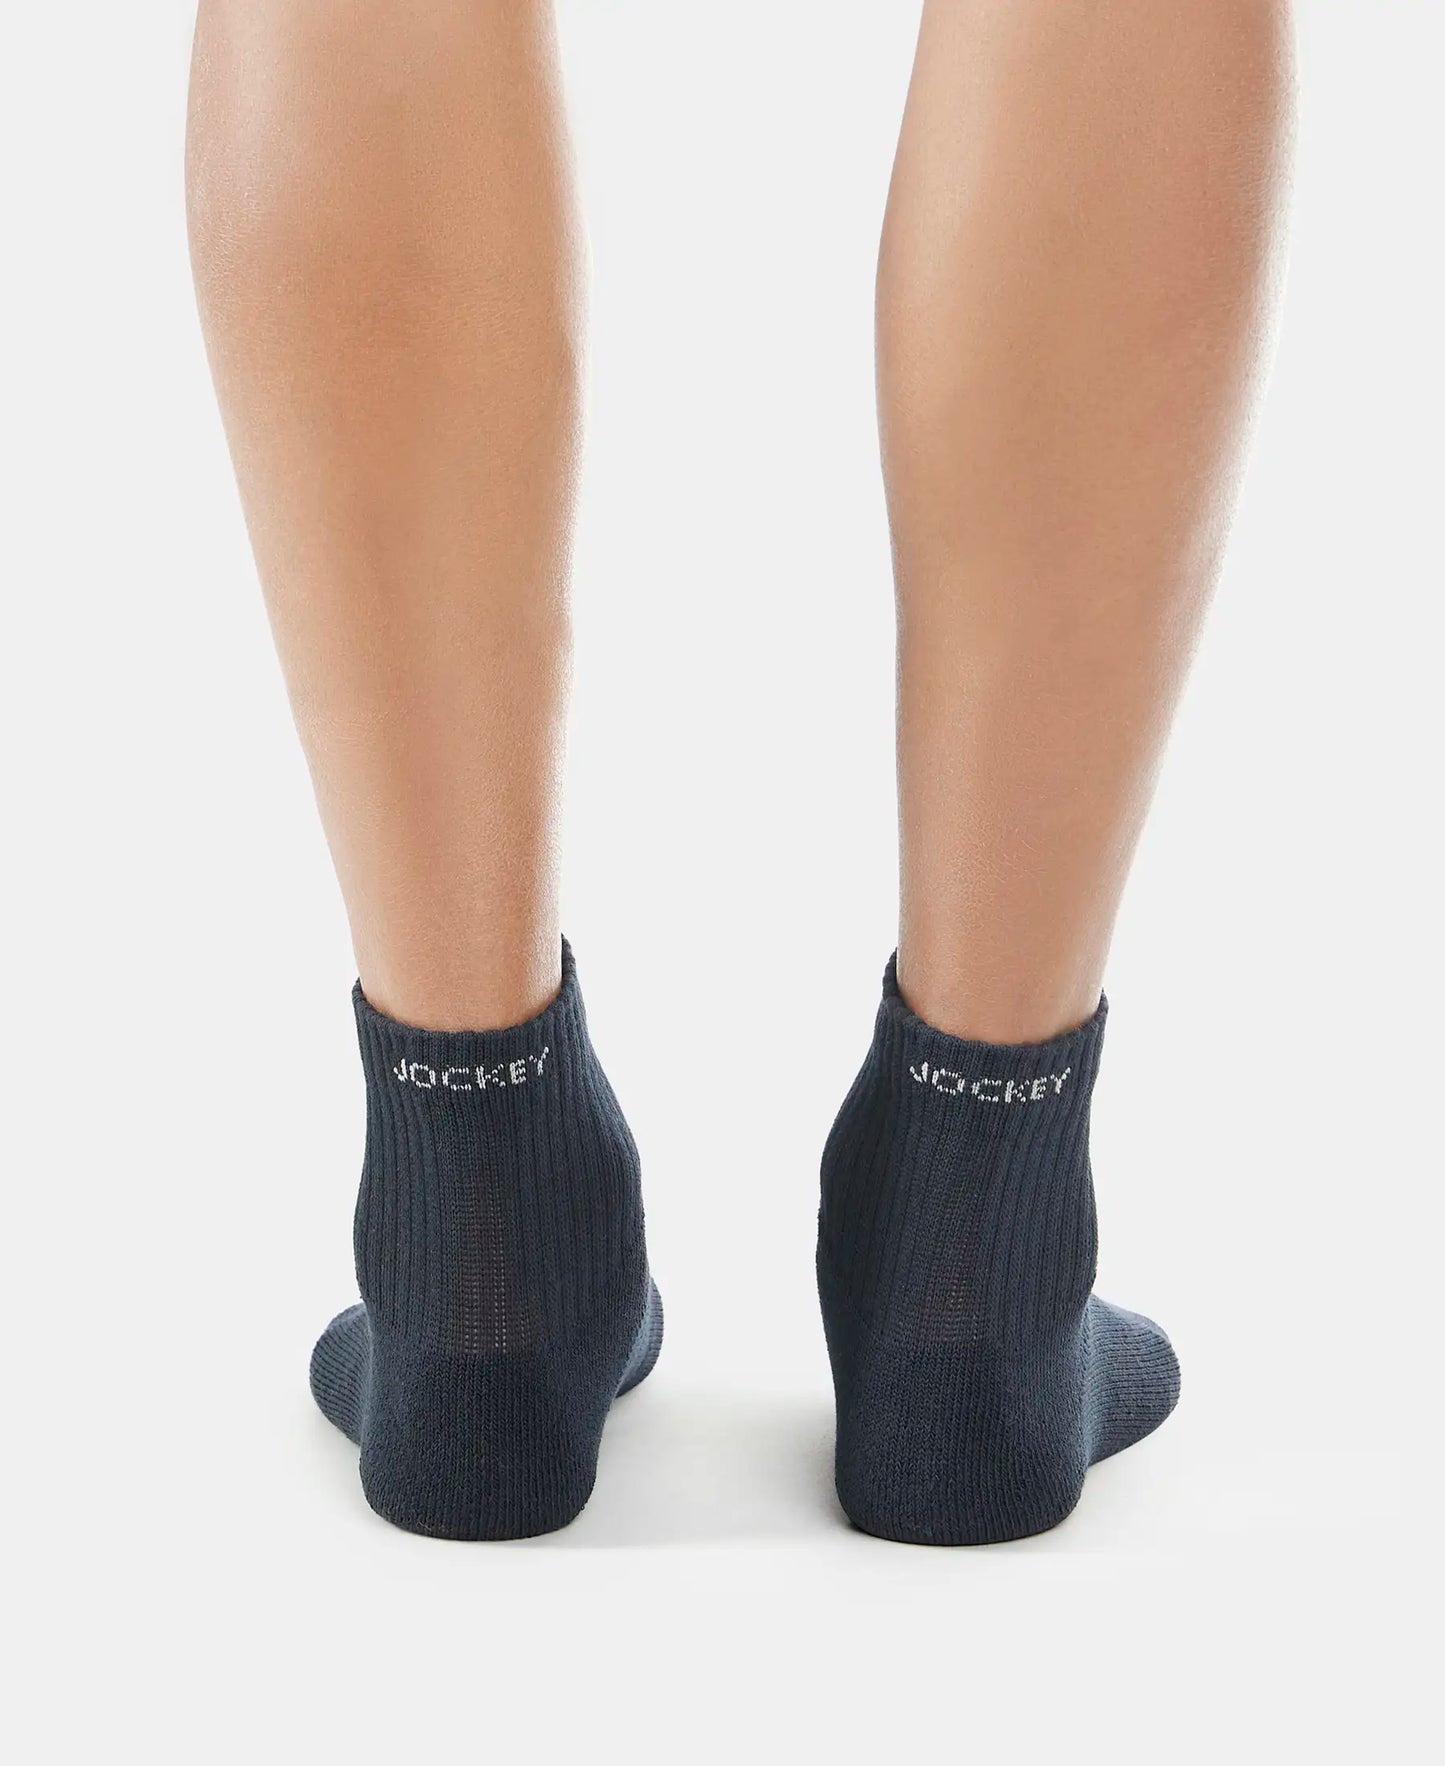 Compact Cotton Terry Ankle Length Socks With StayFresh Treatment - Black/Midgrey Melange/Navy-8